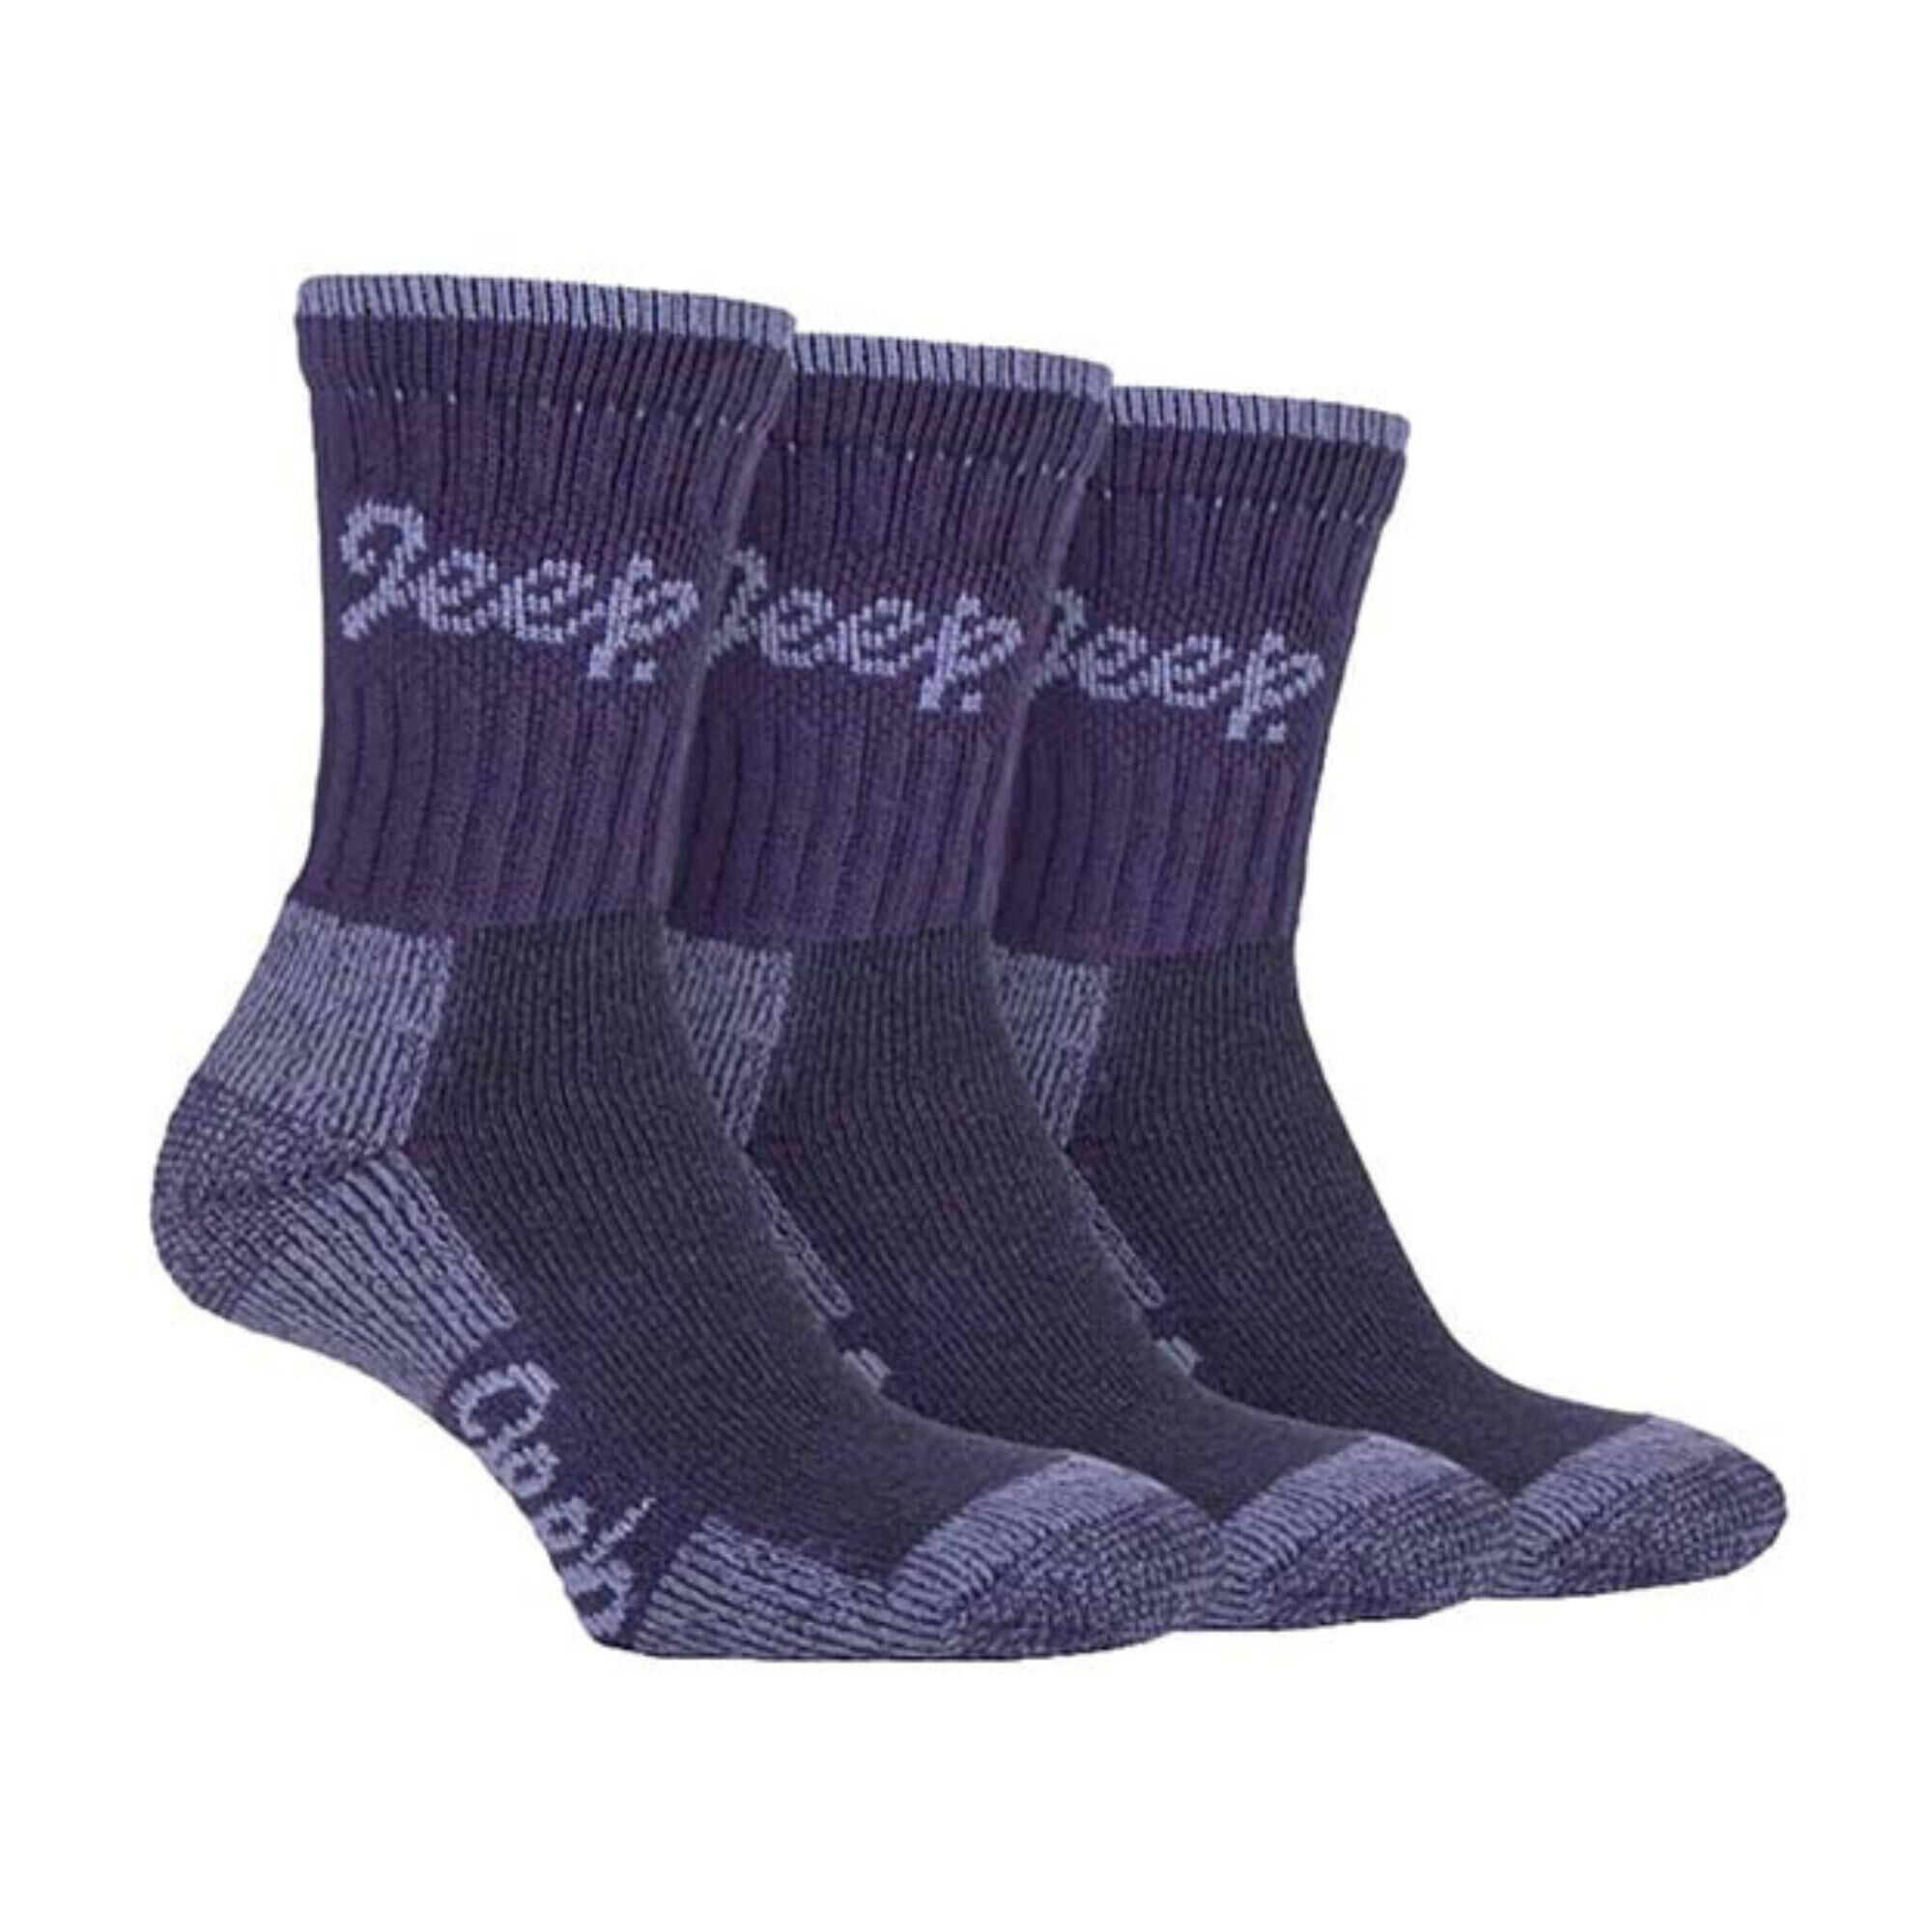 JEEP 3 Pairs Cotton Cushioned Walking Hiking Socks for Ladies